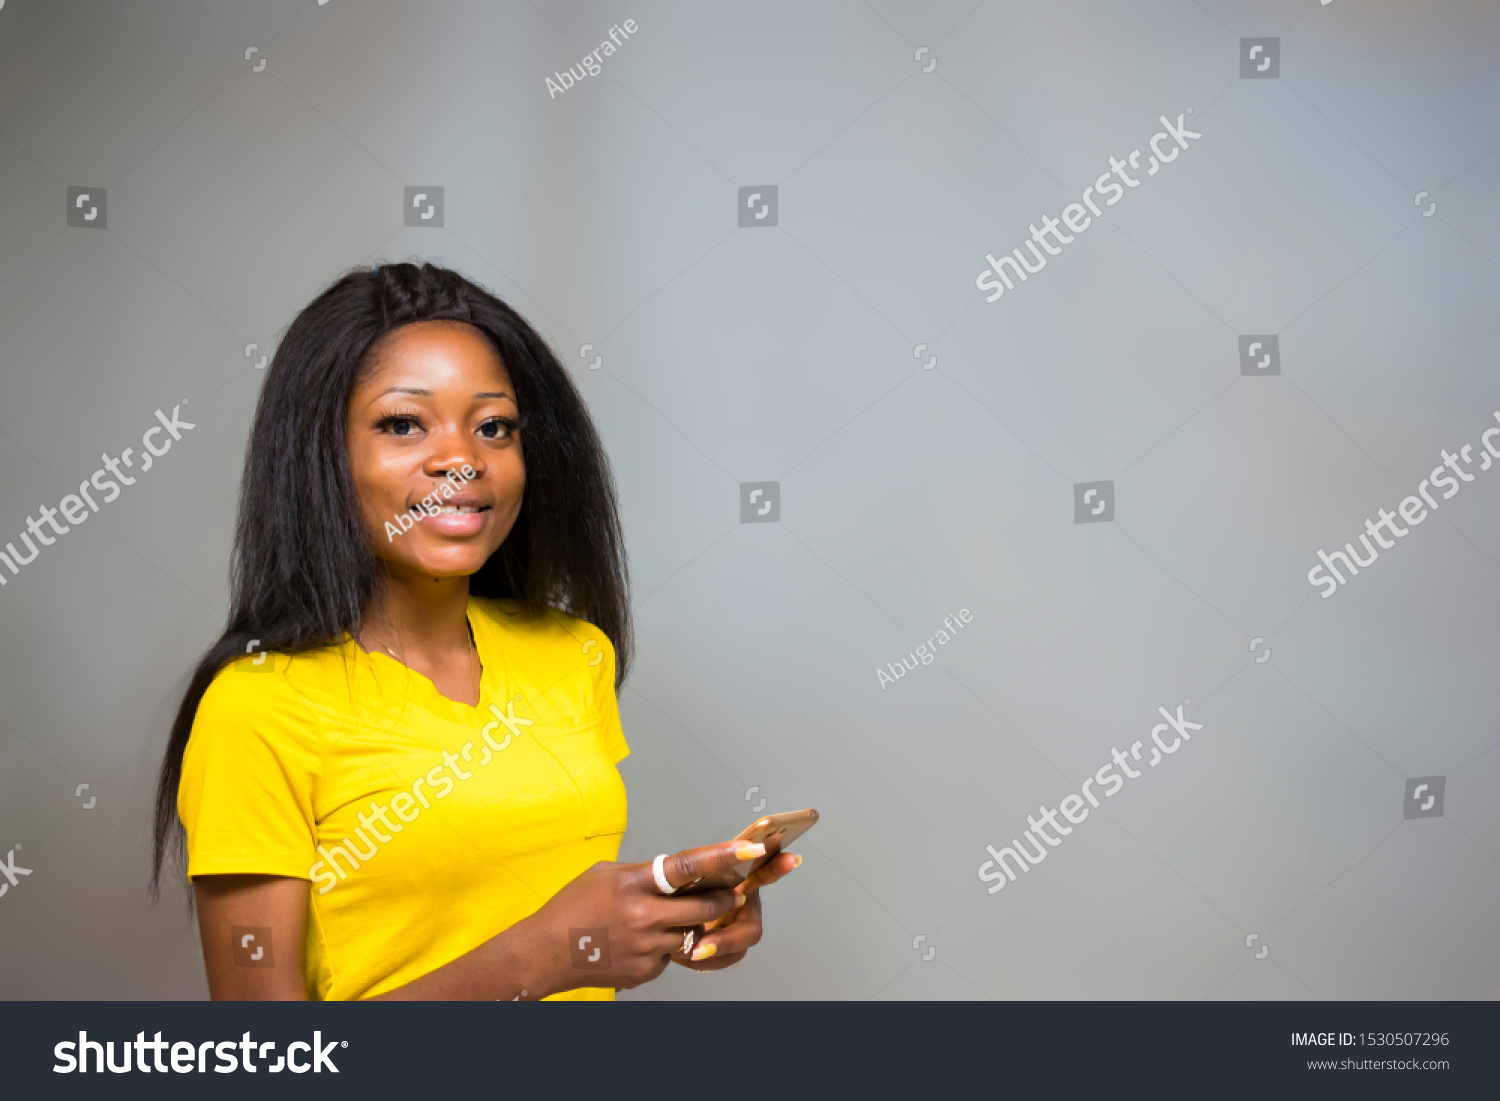 satisfied Young African hipster girl,types text message on cell phone, enjoys online communication, types feedback, wears yellow shirt, isolated on Gray studio wall. Technology concept #1530507296